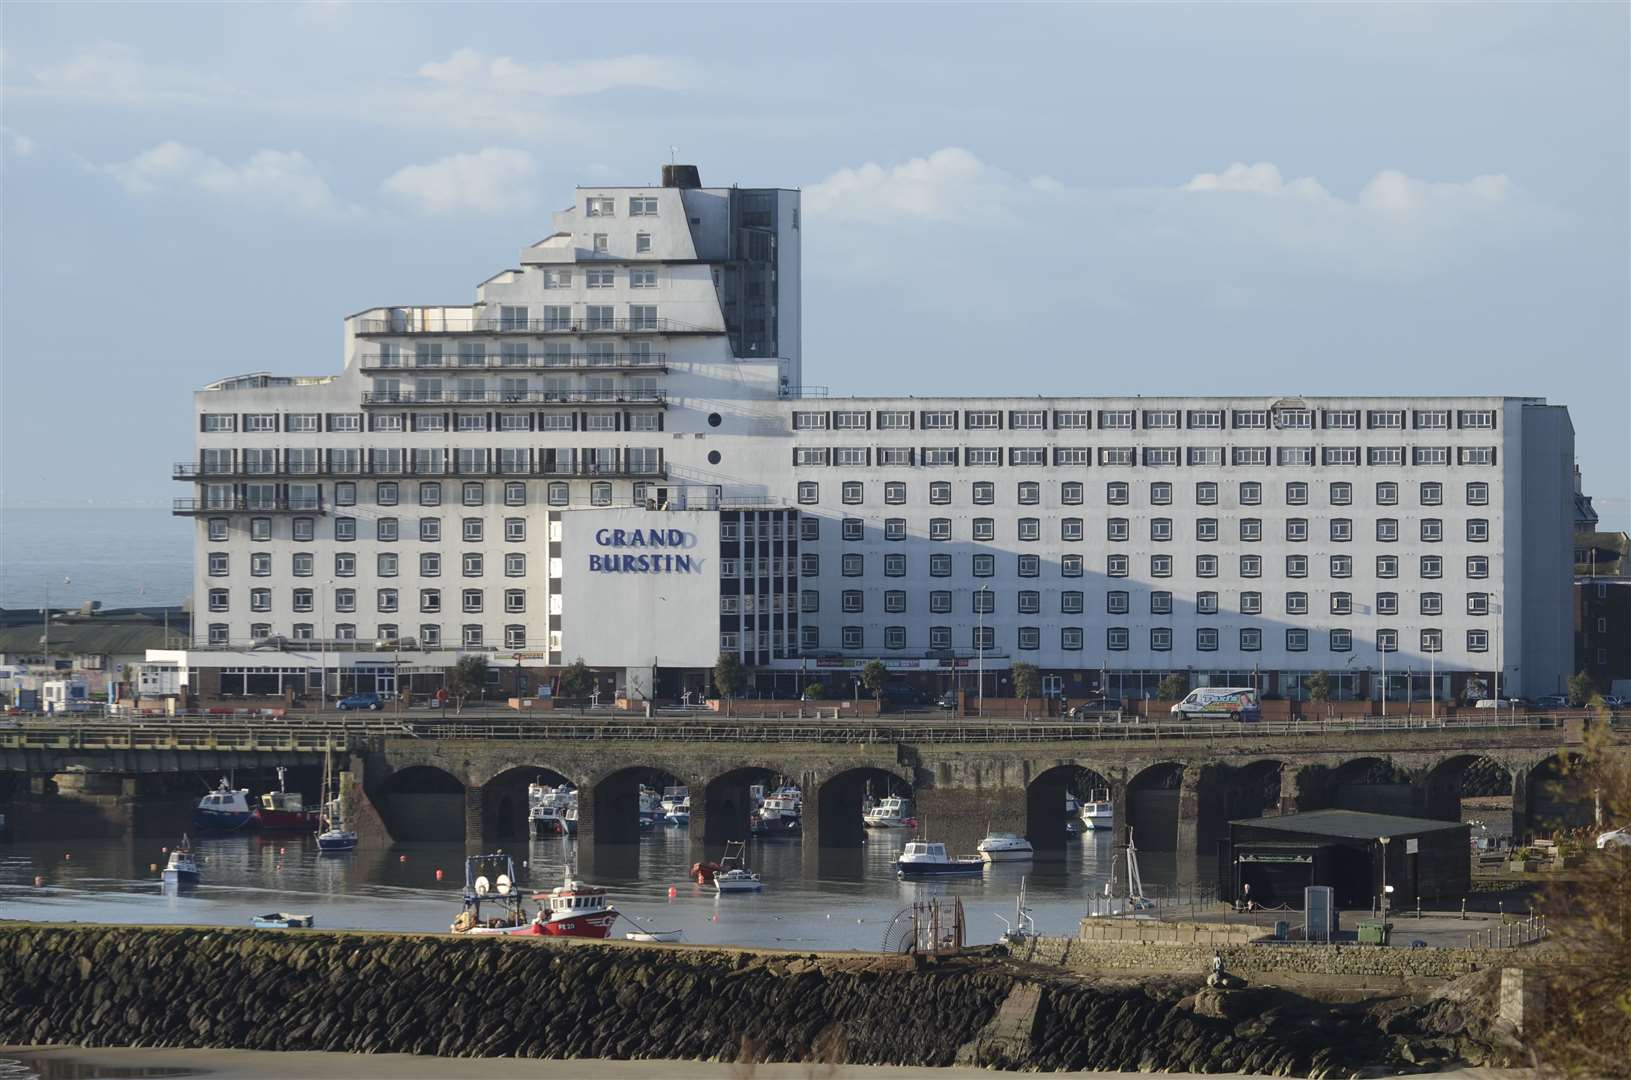 The Grand Burstin Hotel in Folkestone will also be used. Picture: Gary Browne